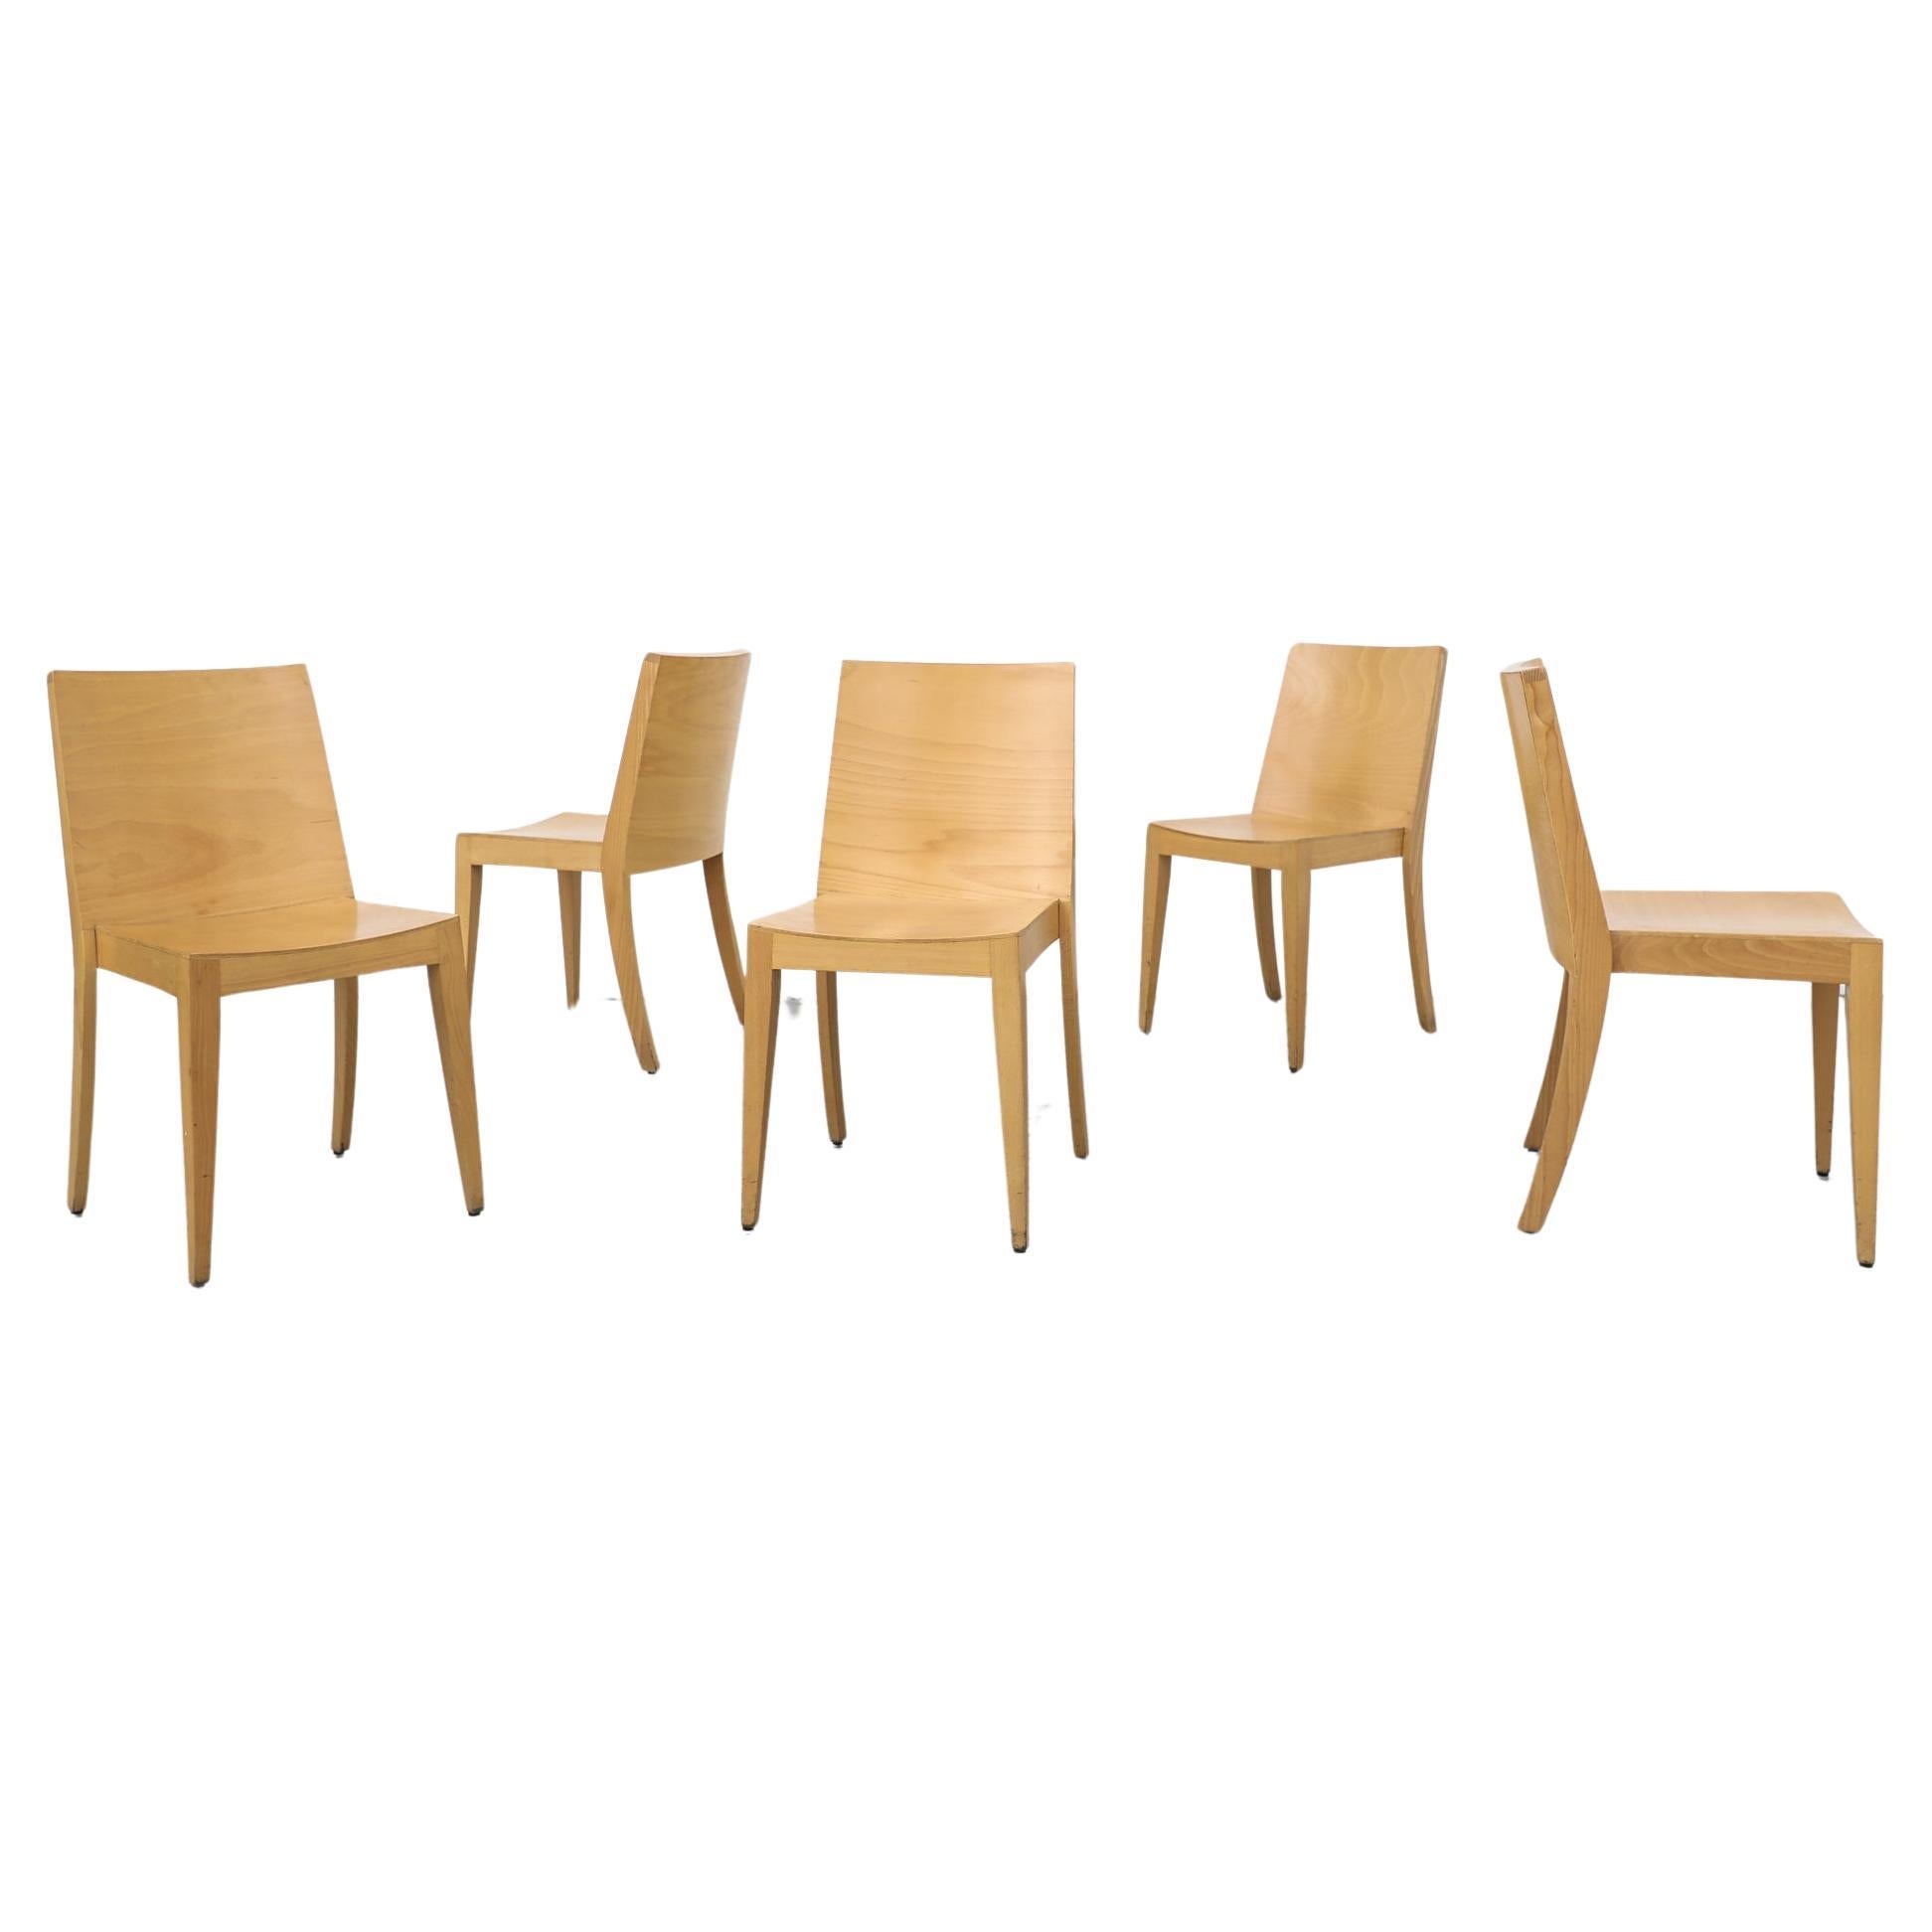 Modernist Philippe Starck Style Blonde Wood Stacking Chairs For Sale